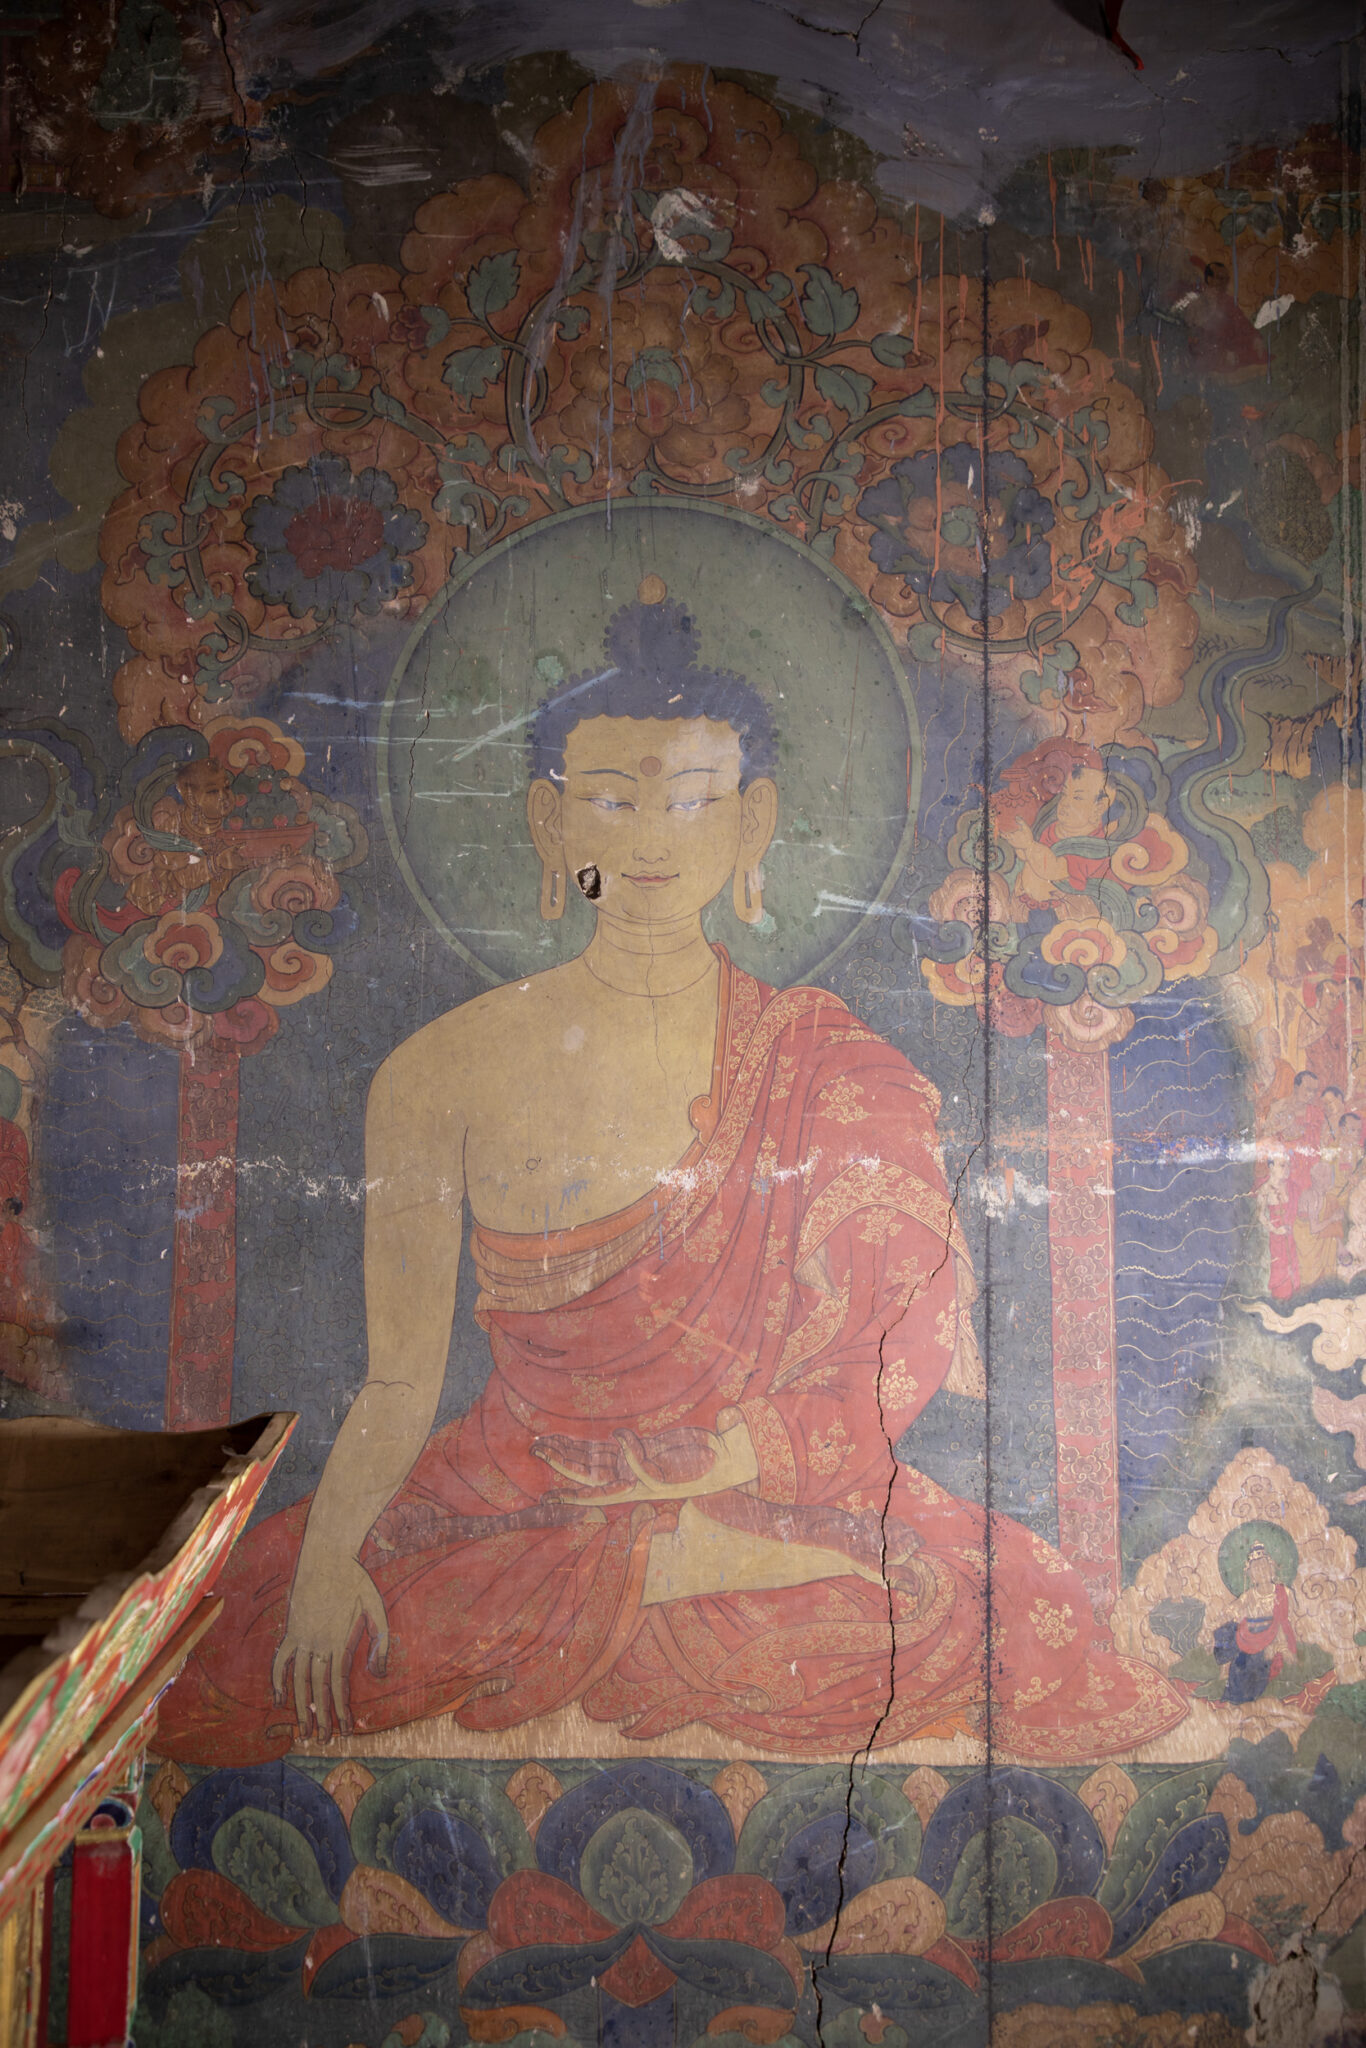 Mural depicting Buddha in sumptuous orange-red robe seated on throne featuring scrollwork backrest